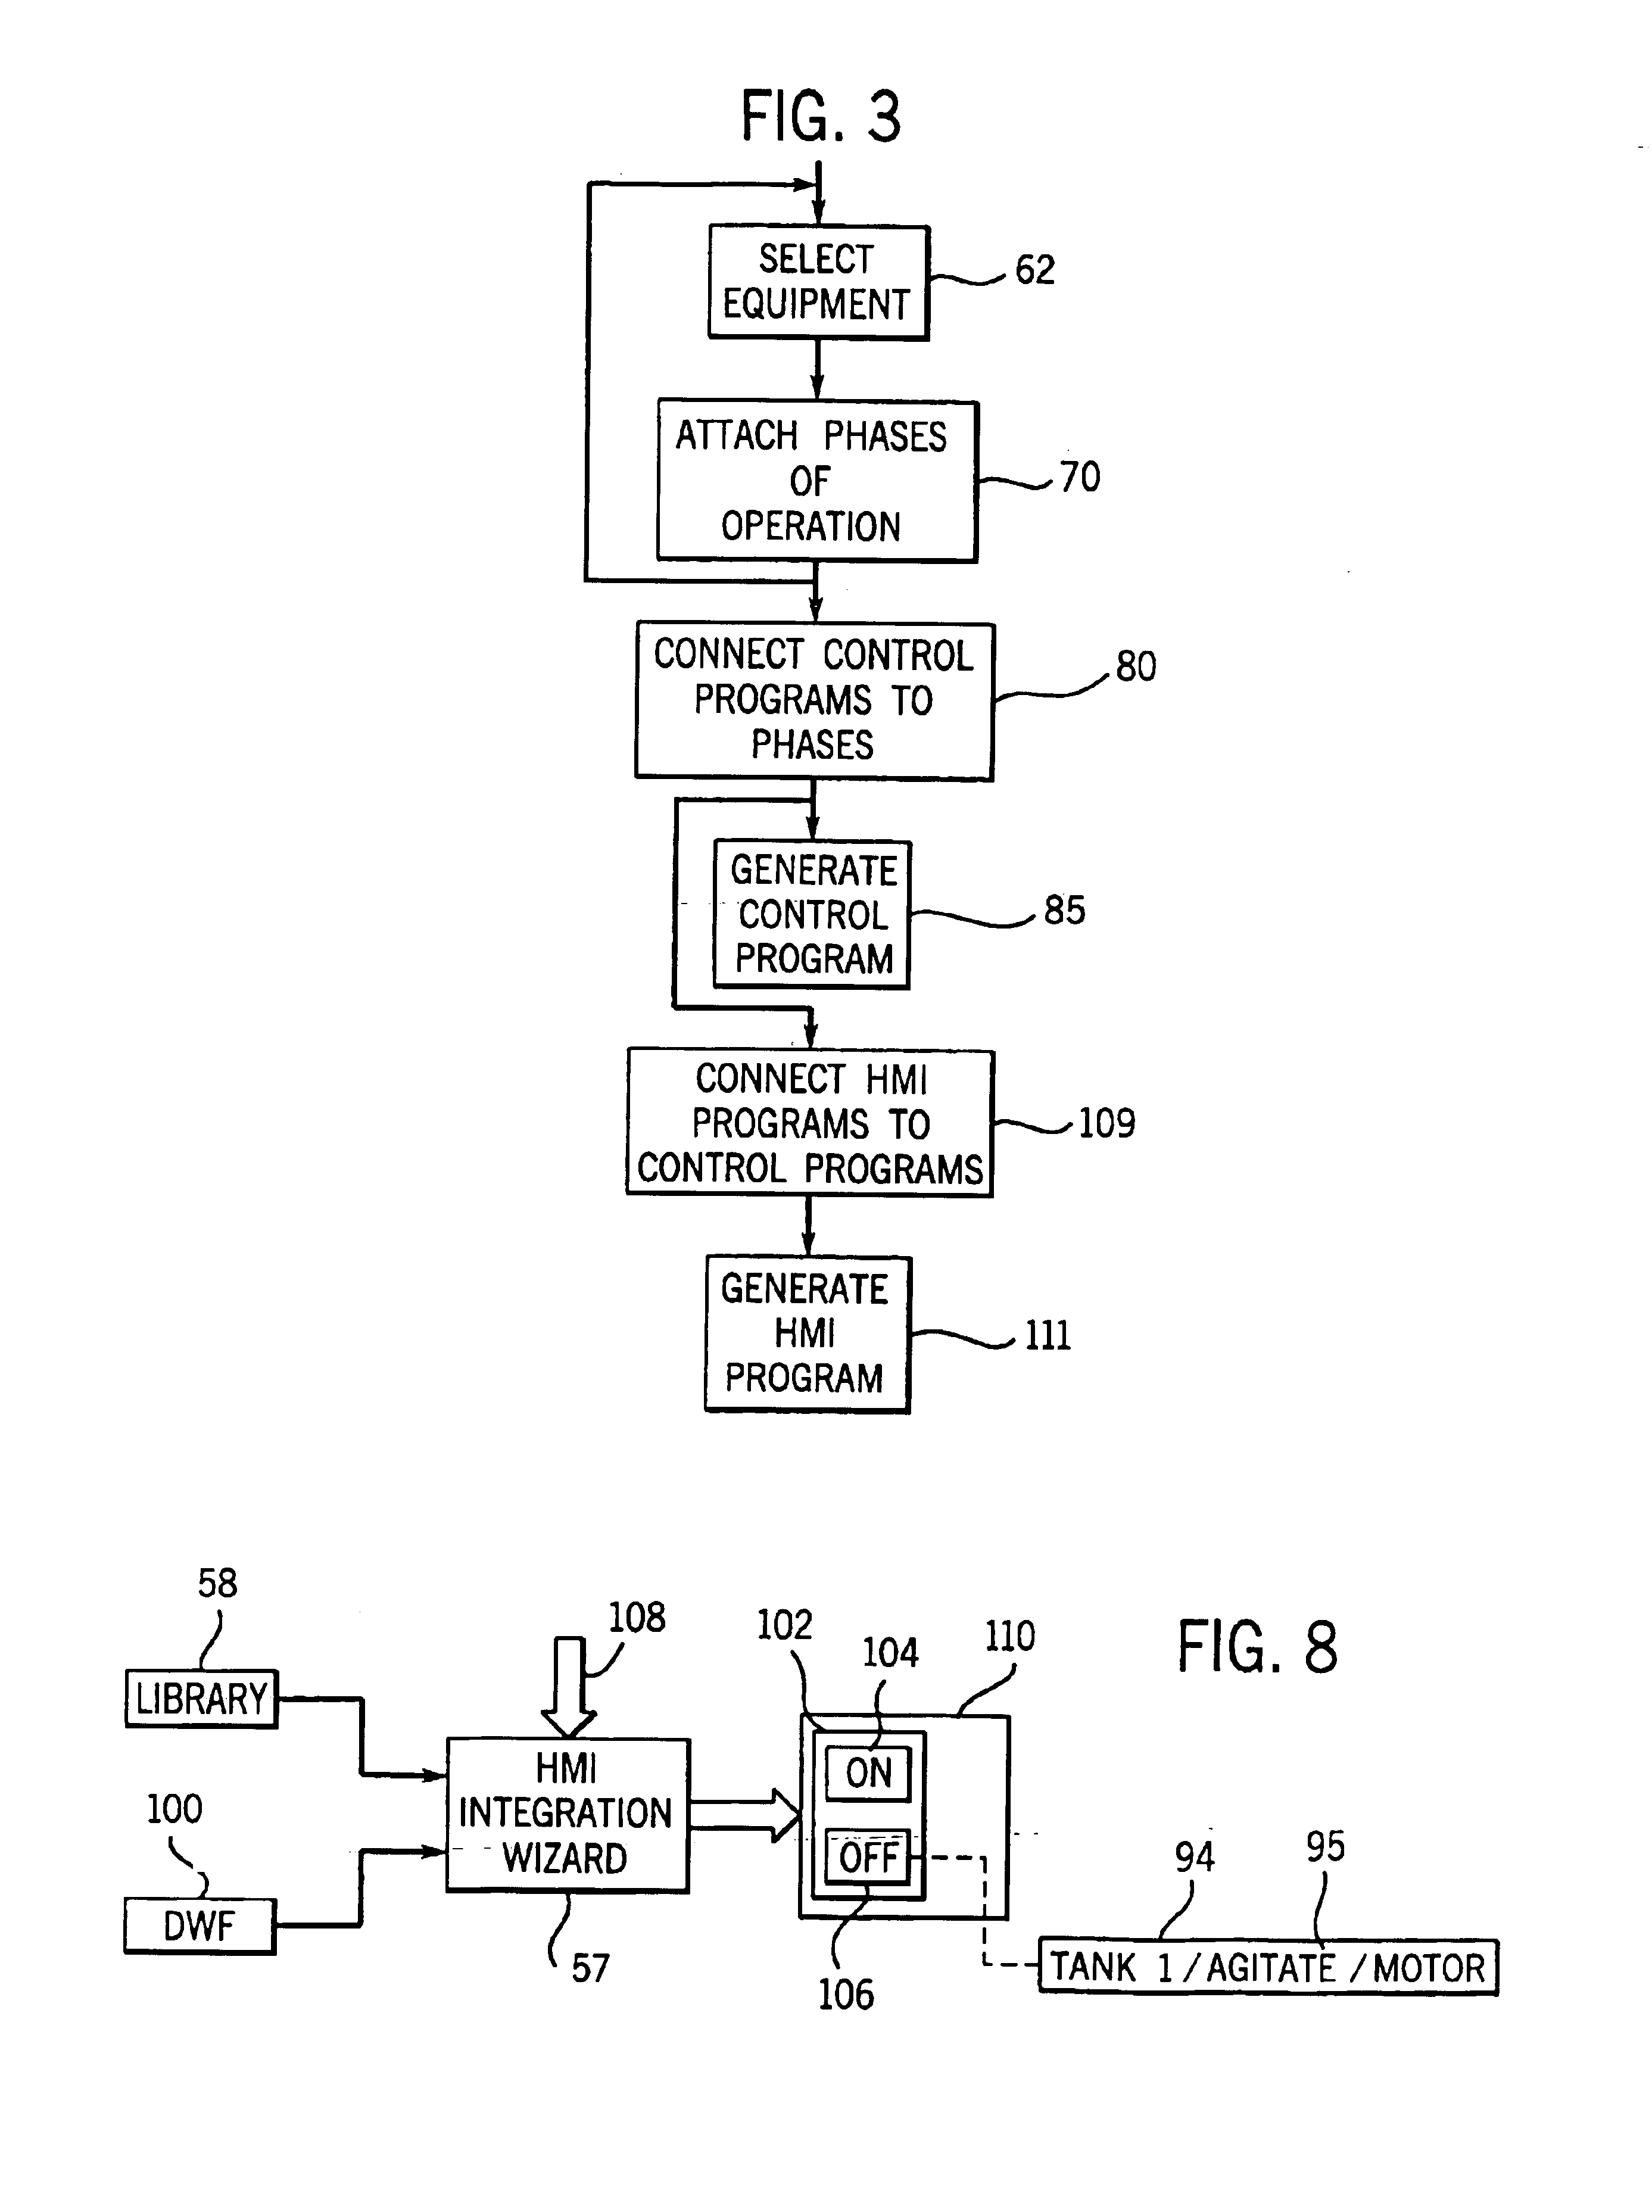 Library manager for automated programming of industrial controls